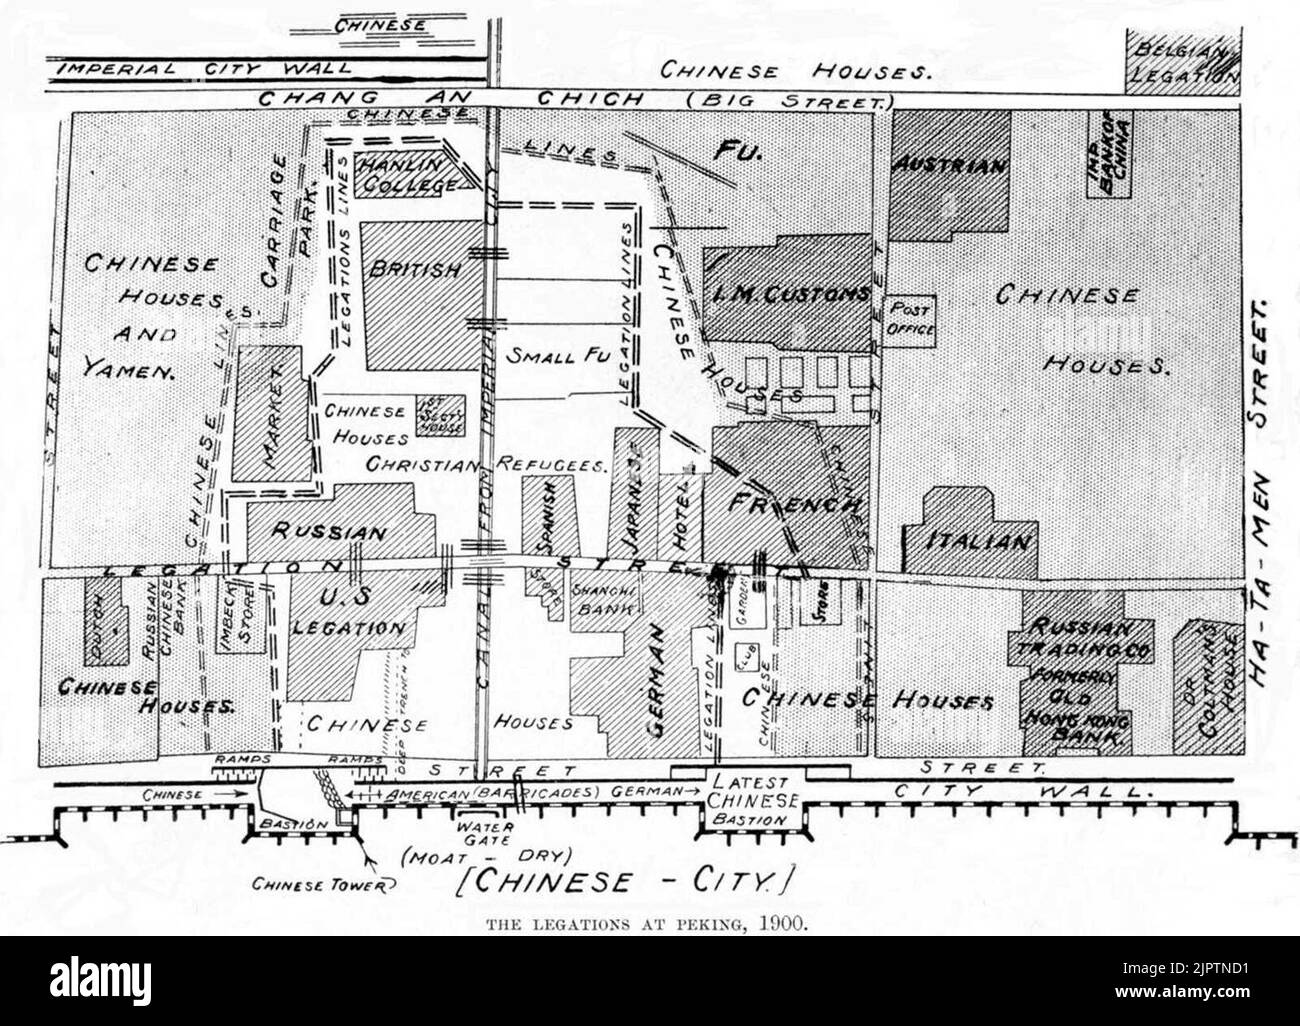 Diagram showing locations of foreign diplomatic legations in Peking during the Boxer siege, 1900 Stock Photo